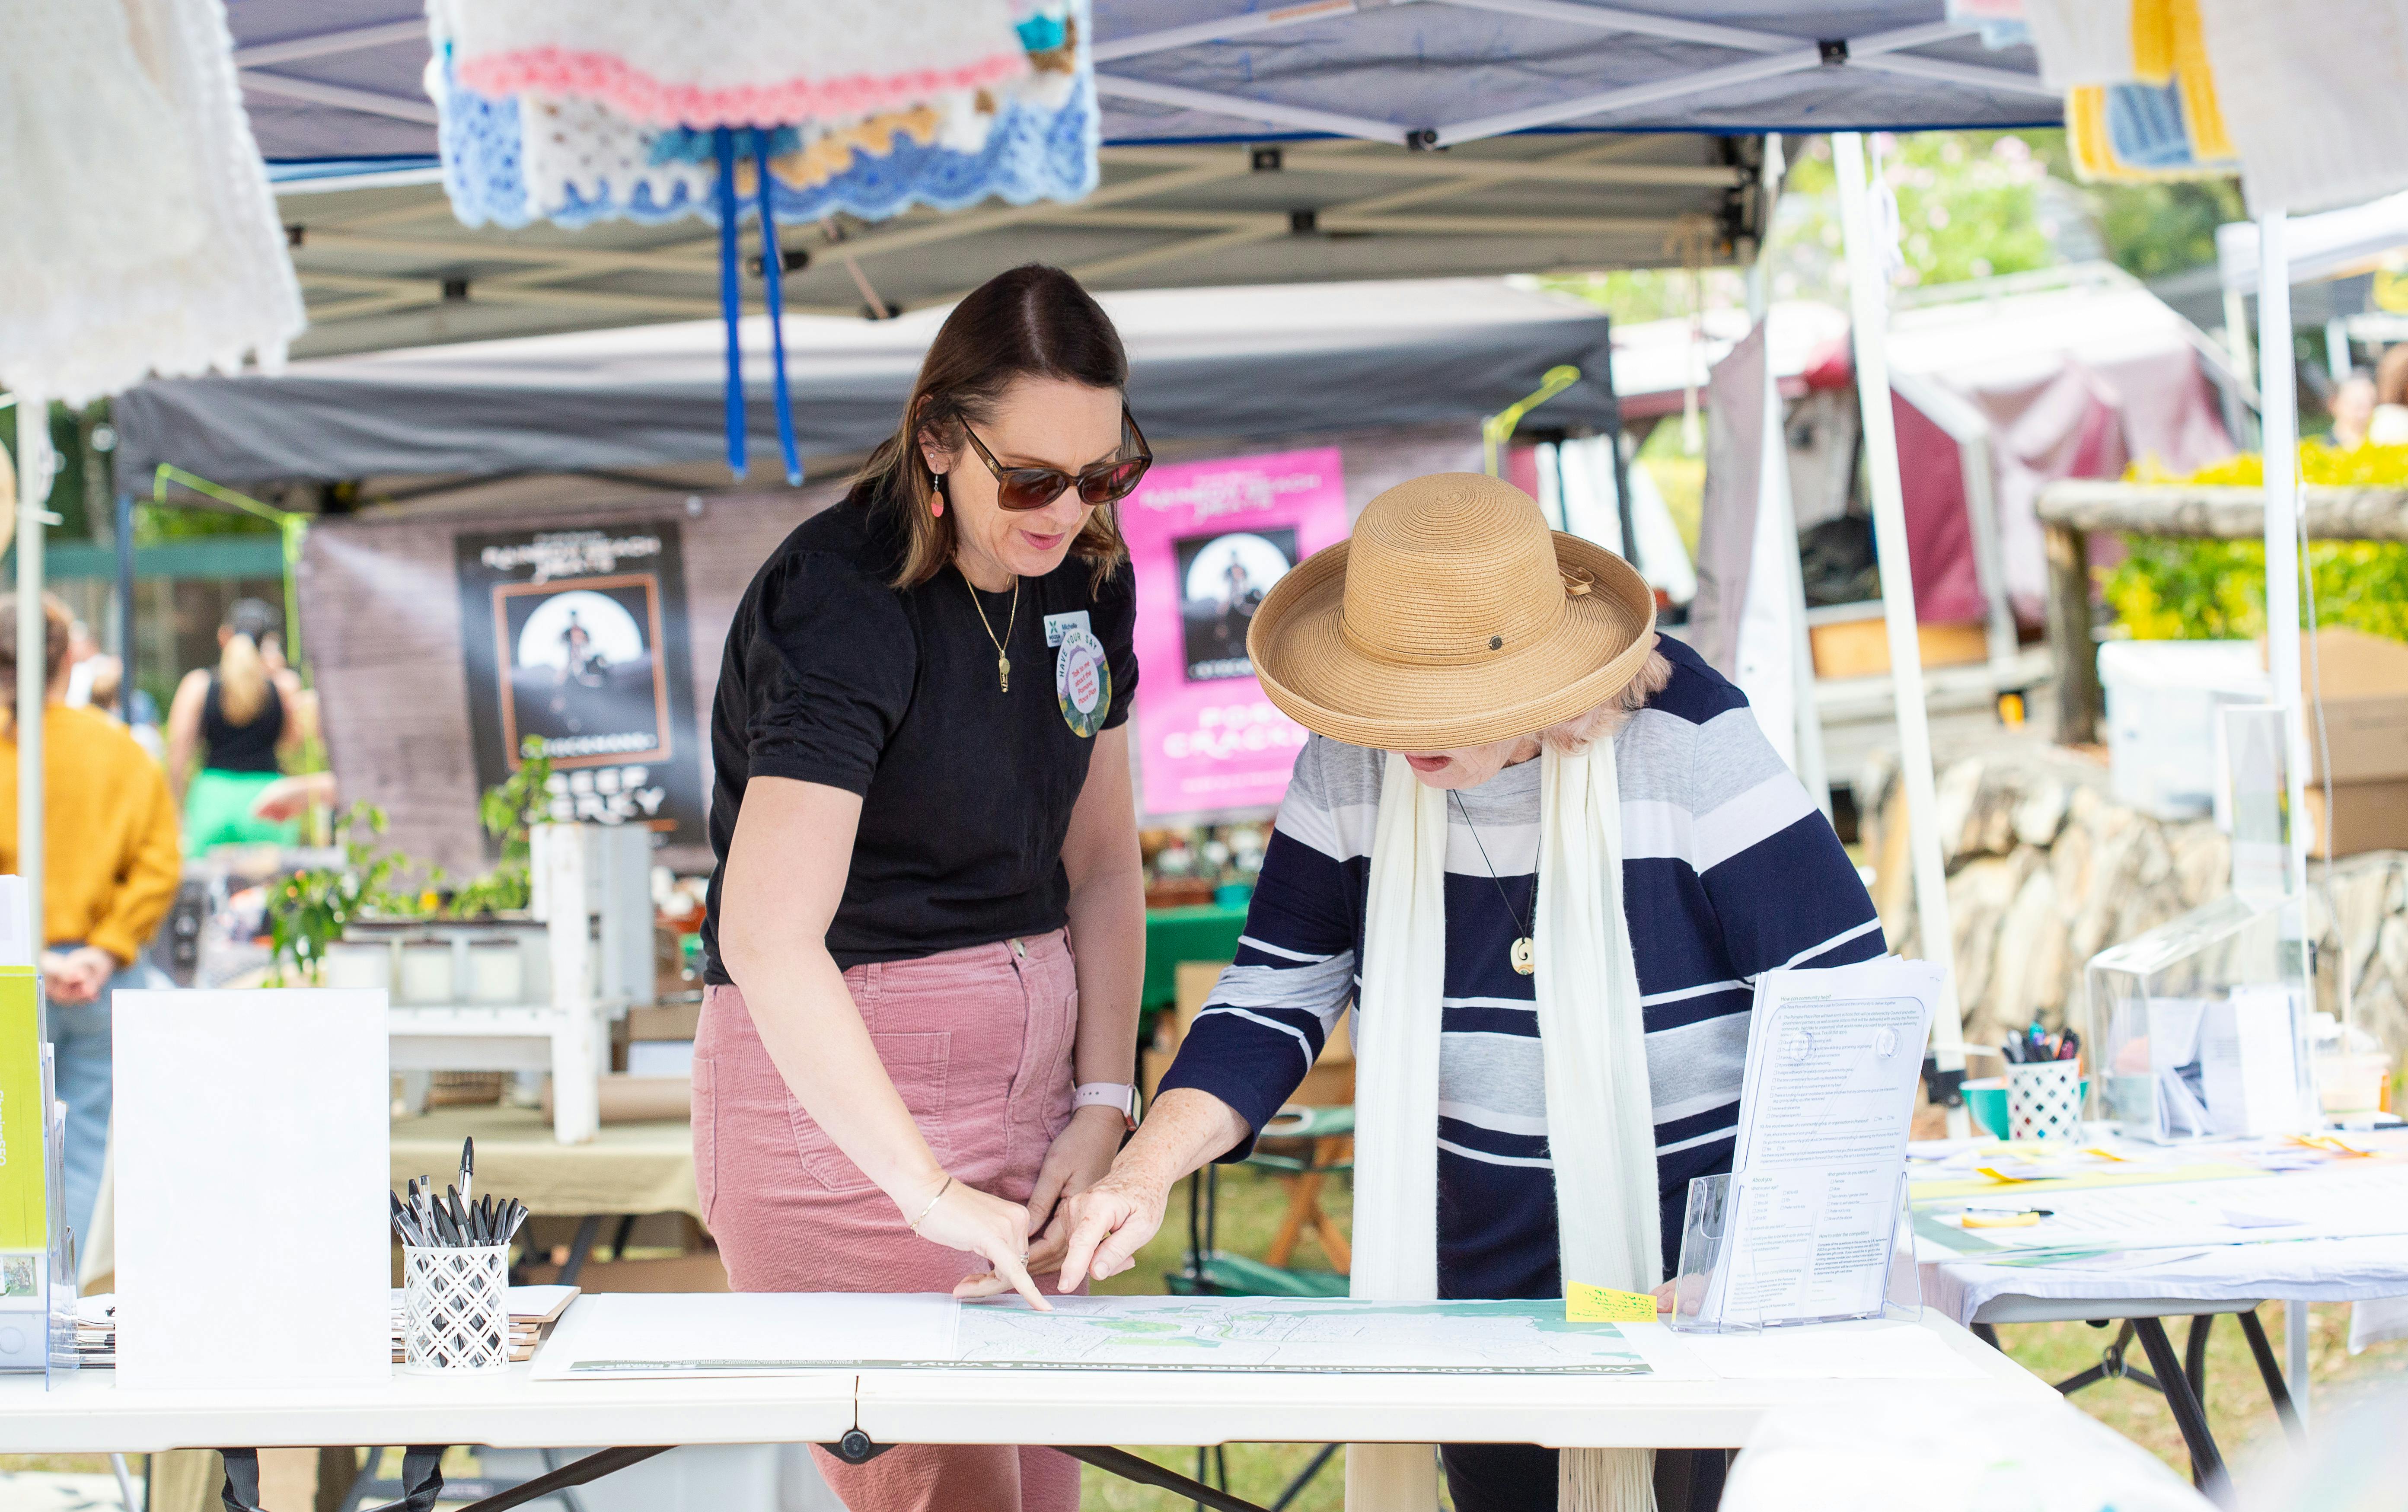 Engaging people at the Pomona Markets. Image courtesy of Kylie Harber Photography.